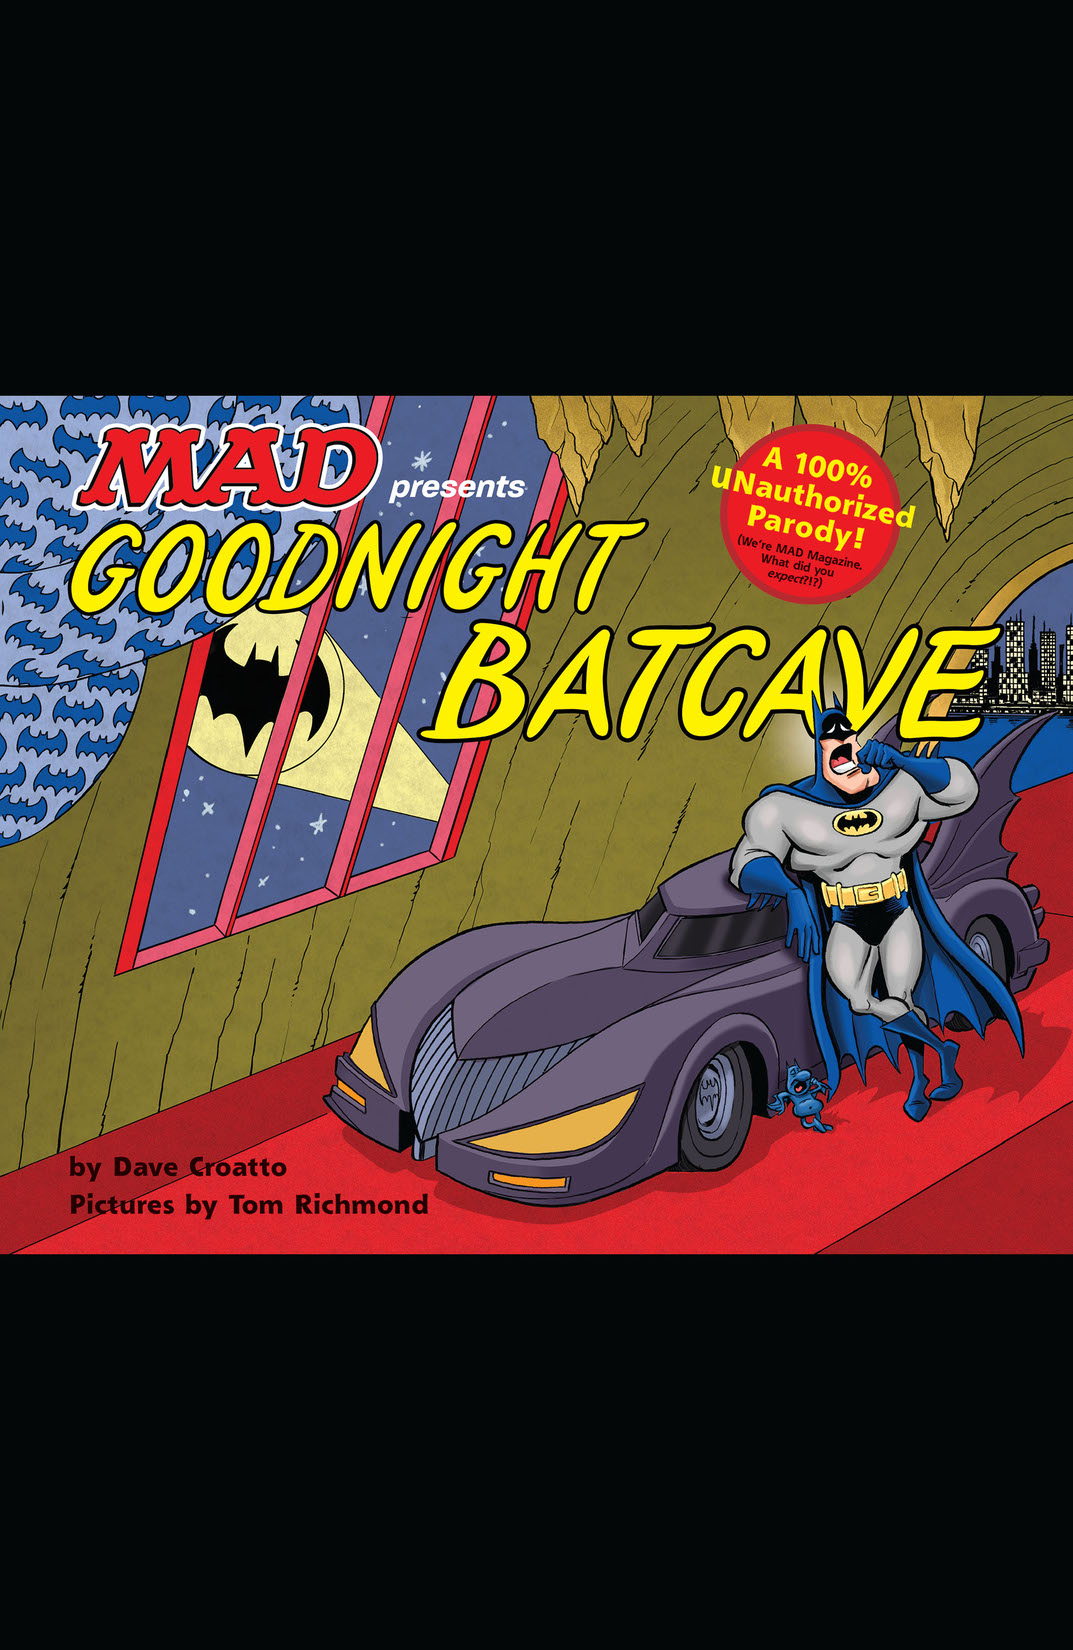 Goodnight Batcave preview images